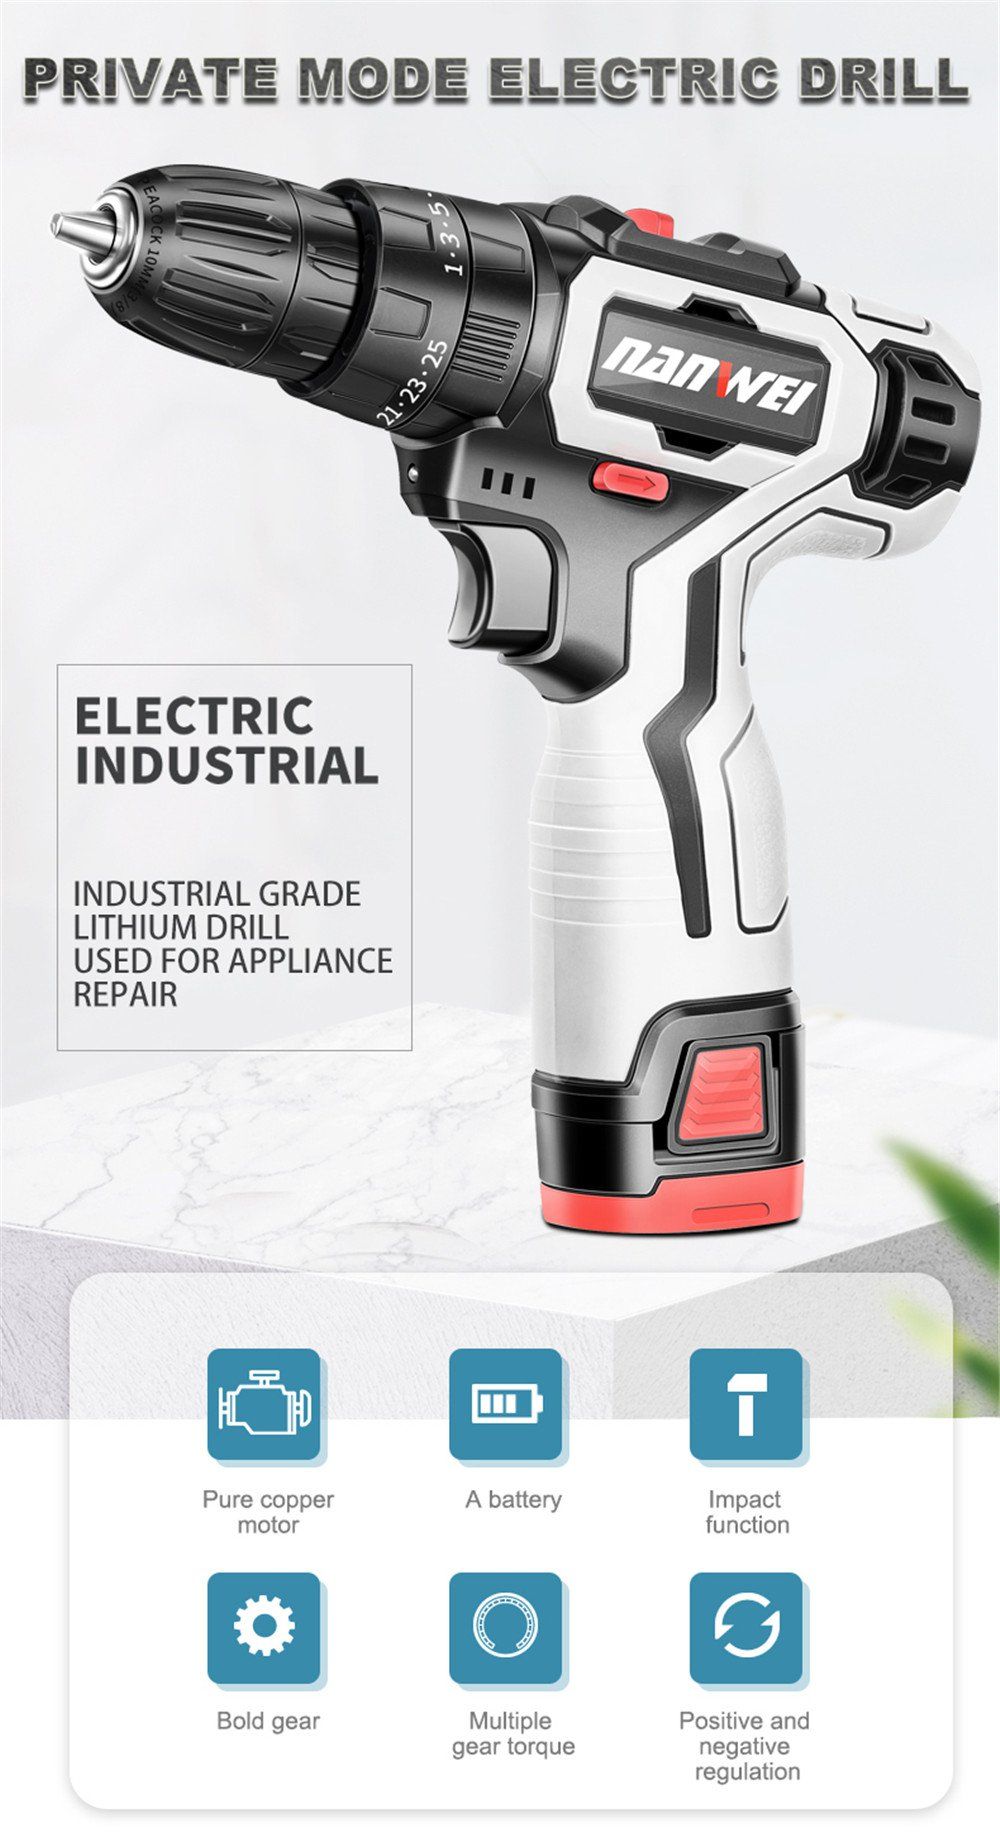 Nanwei-18V-Brushed-Impact-Drill-27NM-Li-ion-Rechargeable-Electric-Flat-Drill-Screw-Driver-2-Speeds-2-1695925